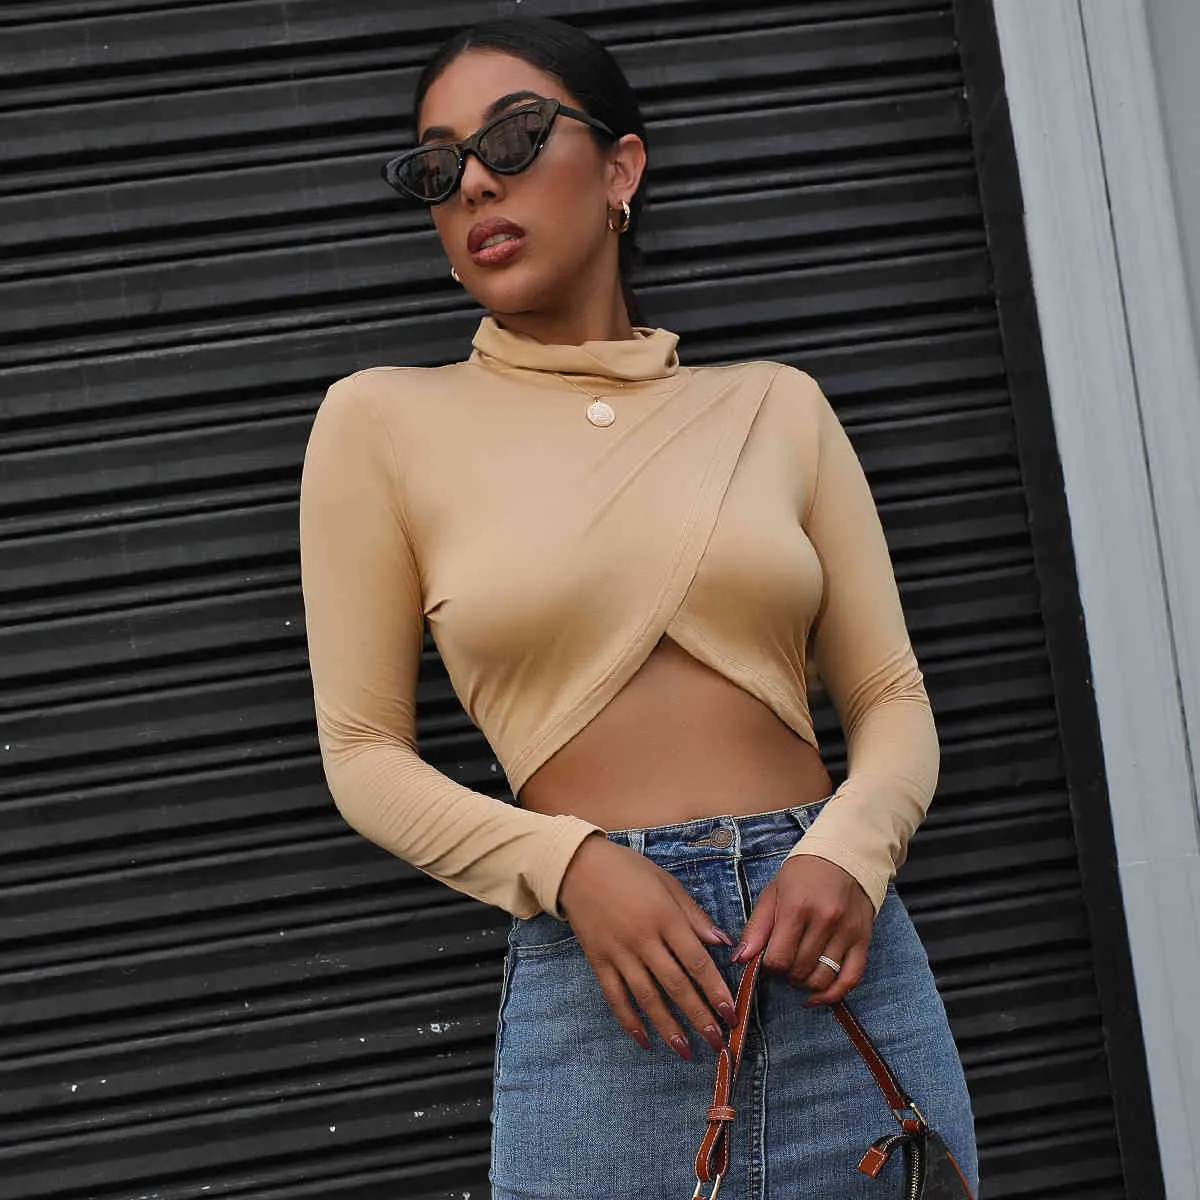 Girls Autumn Solid Color Sexy Stacked Neck T-shirts Women Slit Long Sleeve Short Basic Tops Ladies Skinny Crop Top Tshirt 210517